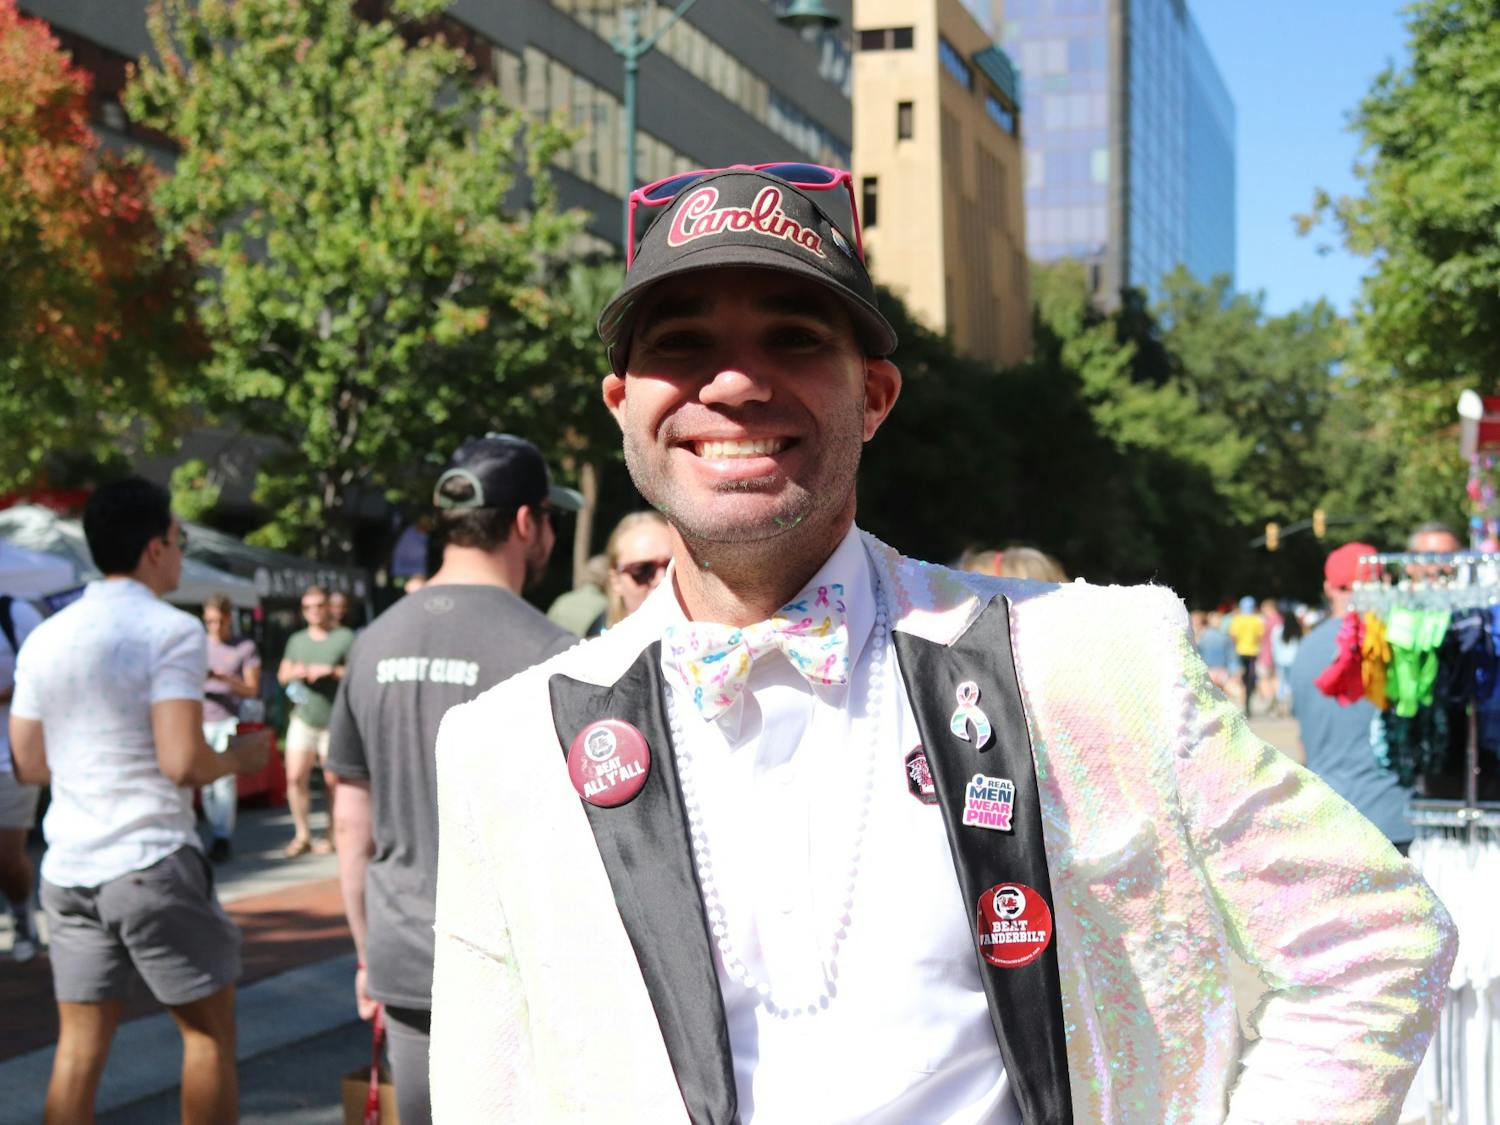 Justin Caudill represents the South Carolina Gamecocks at the 2021 South Carolina Pride Festival, an event dedicated to celebrating the LGBTQIA+ community and advocating for LGBTQIA+ equality.&nbsp;